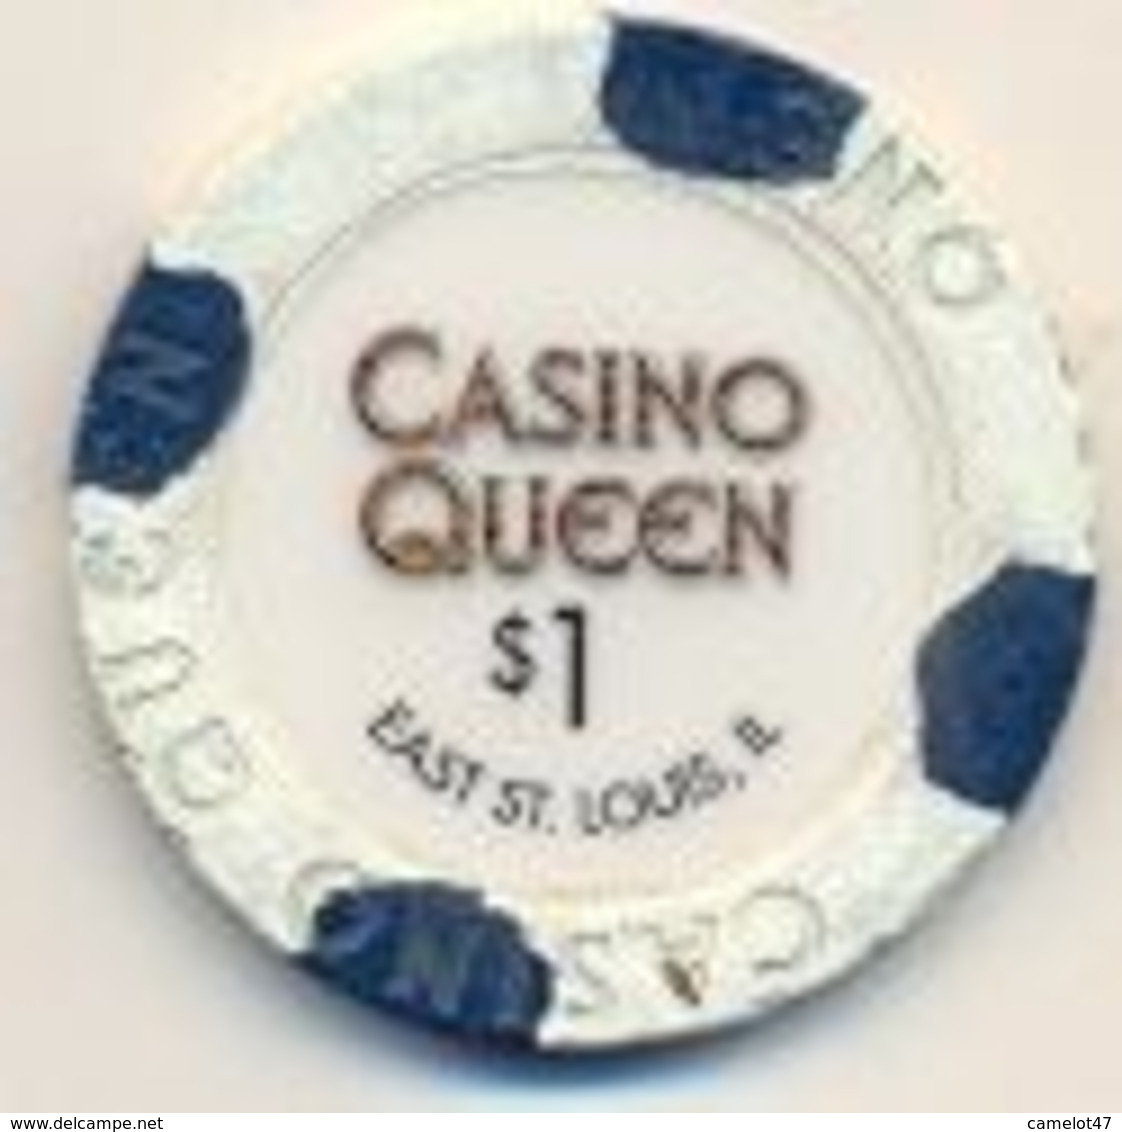 Casino Queen, East St. Louis, IL, U.S.A. $1 Chip, Used Condition, # Queen-1 - Casino